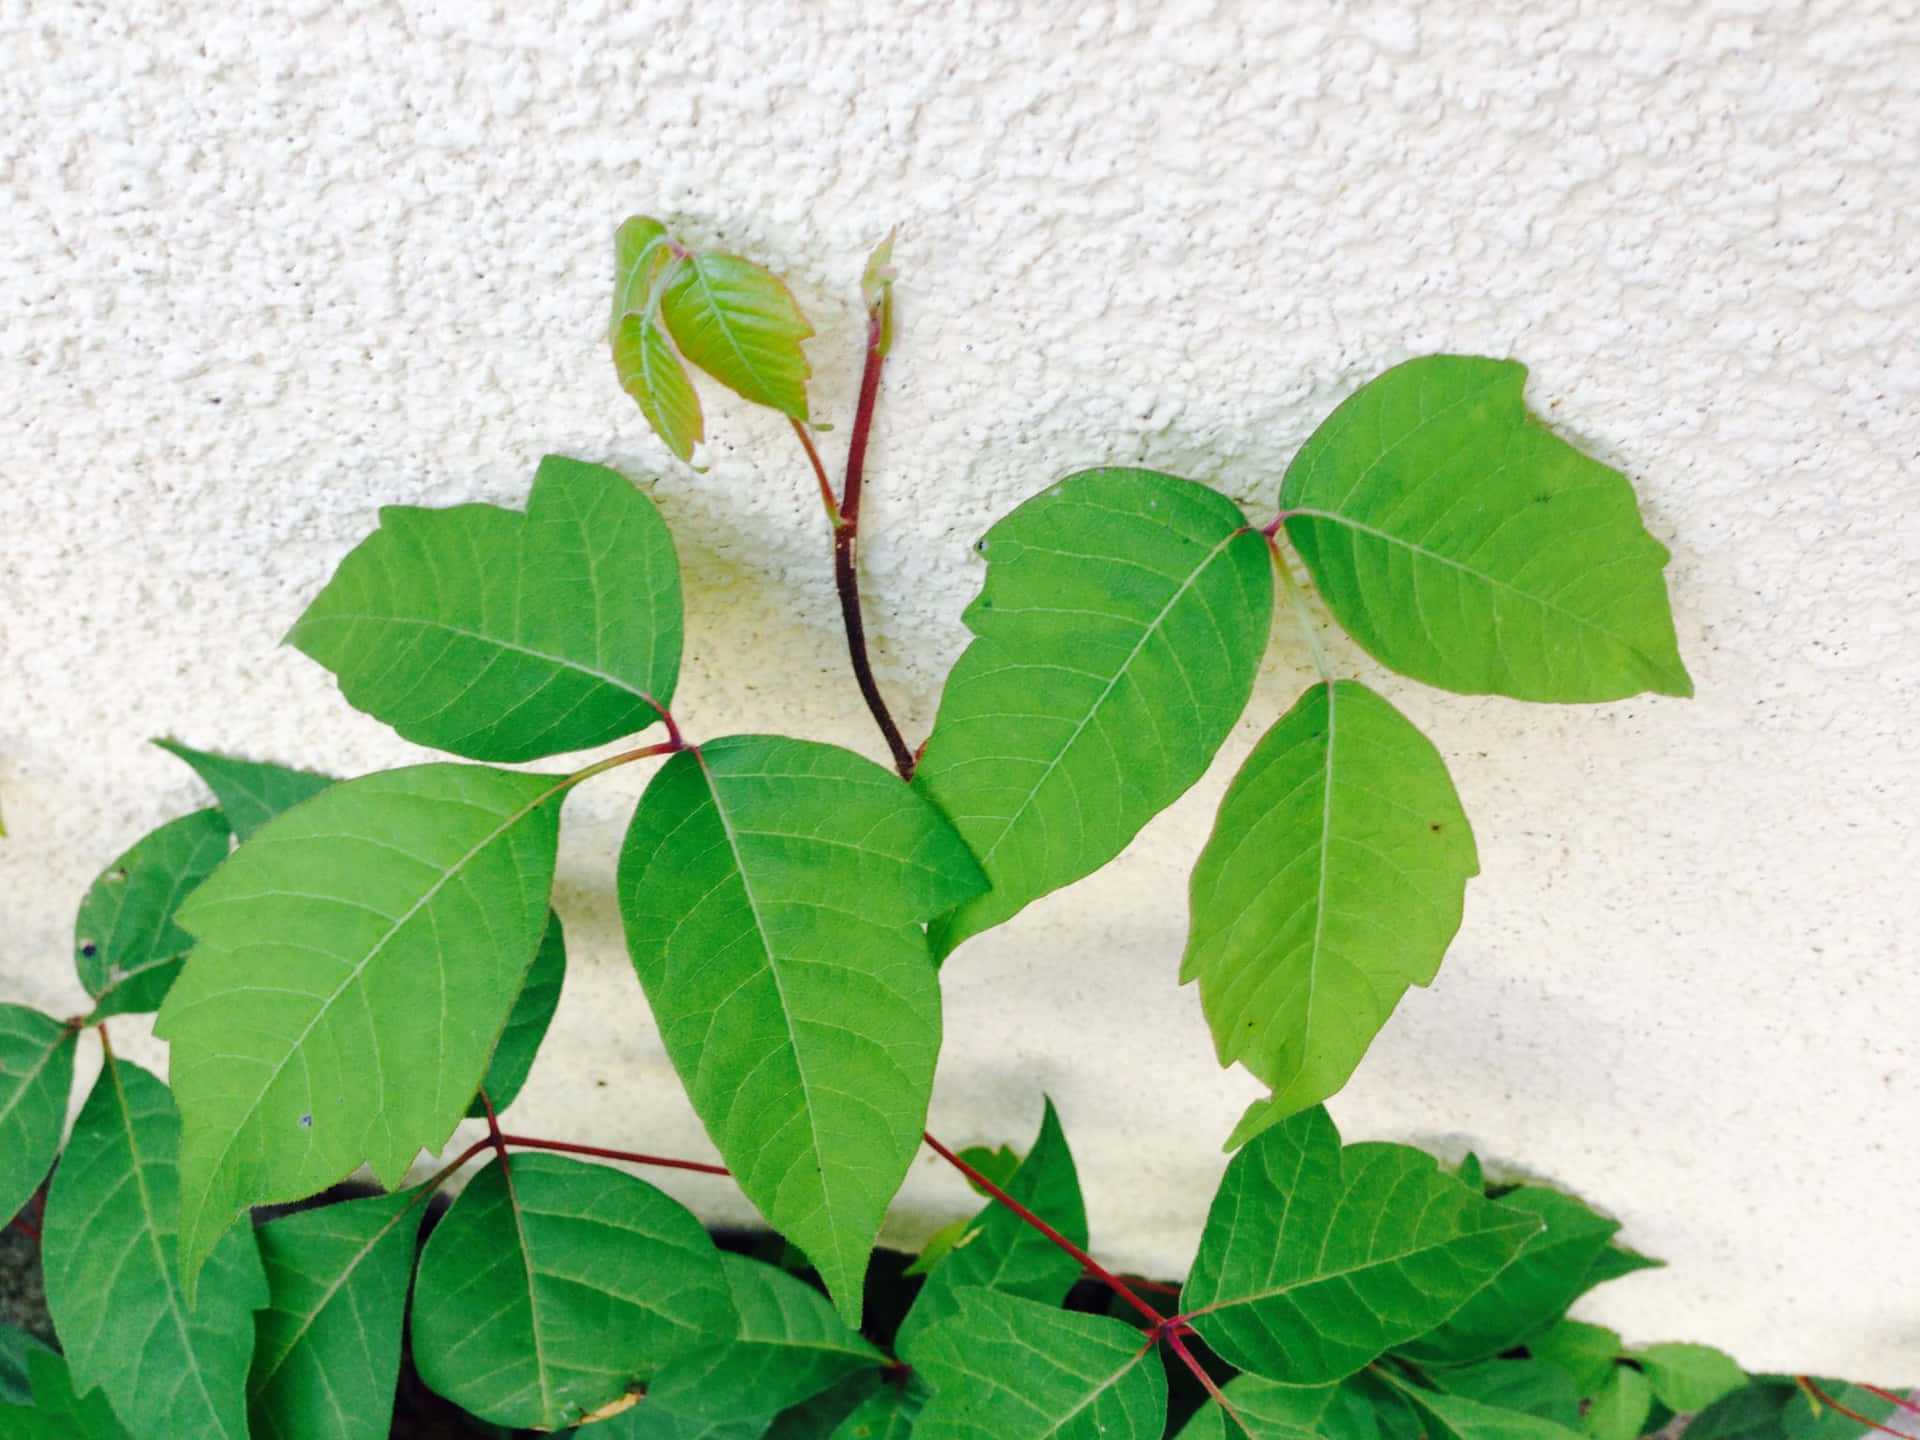 A Plant With Green Leaves Growing On A Wall